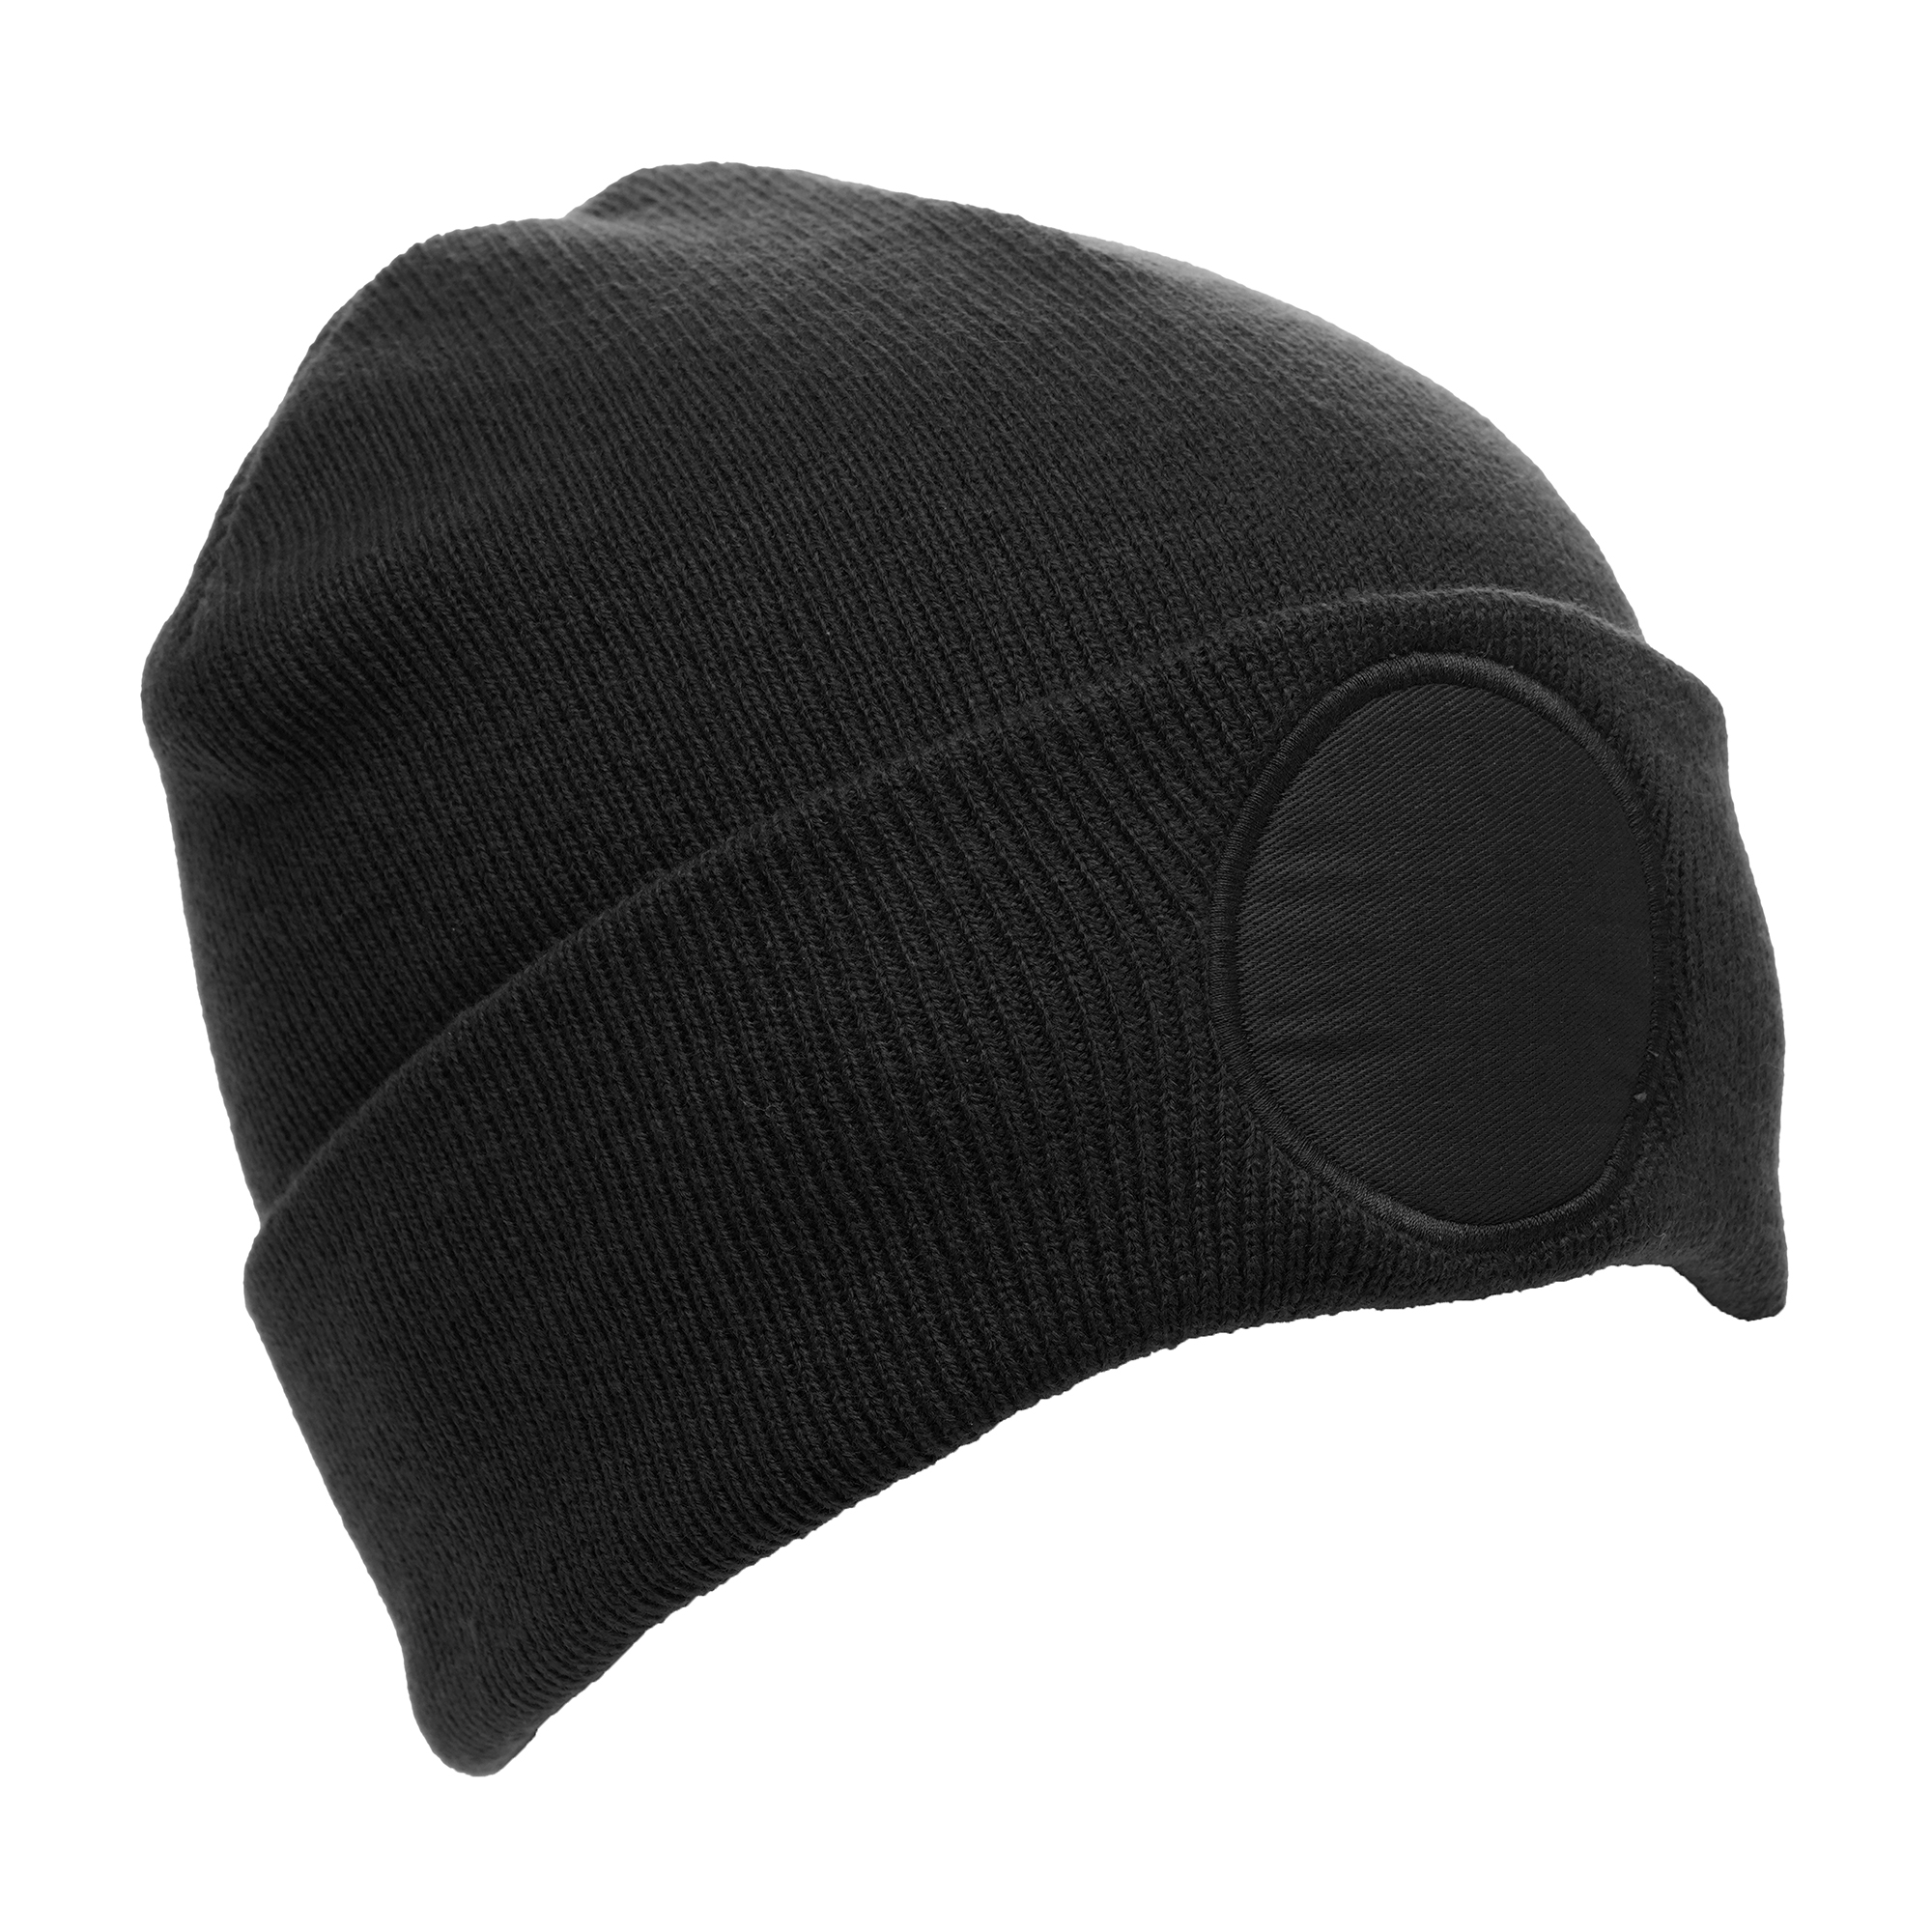 Crafted from 100% soft-touch acrylic with double layer knit, and a circular polyester patch for smooth and easy customisation. With a 6cm diameter patch that is perfect for decoration, this one-size beanie allows your company logo to standout and be recognised. Available in a range of colours.